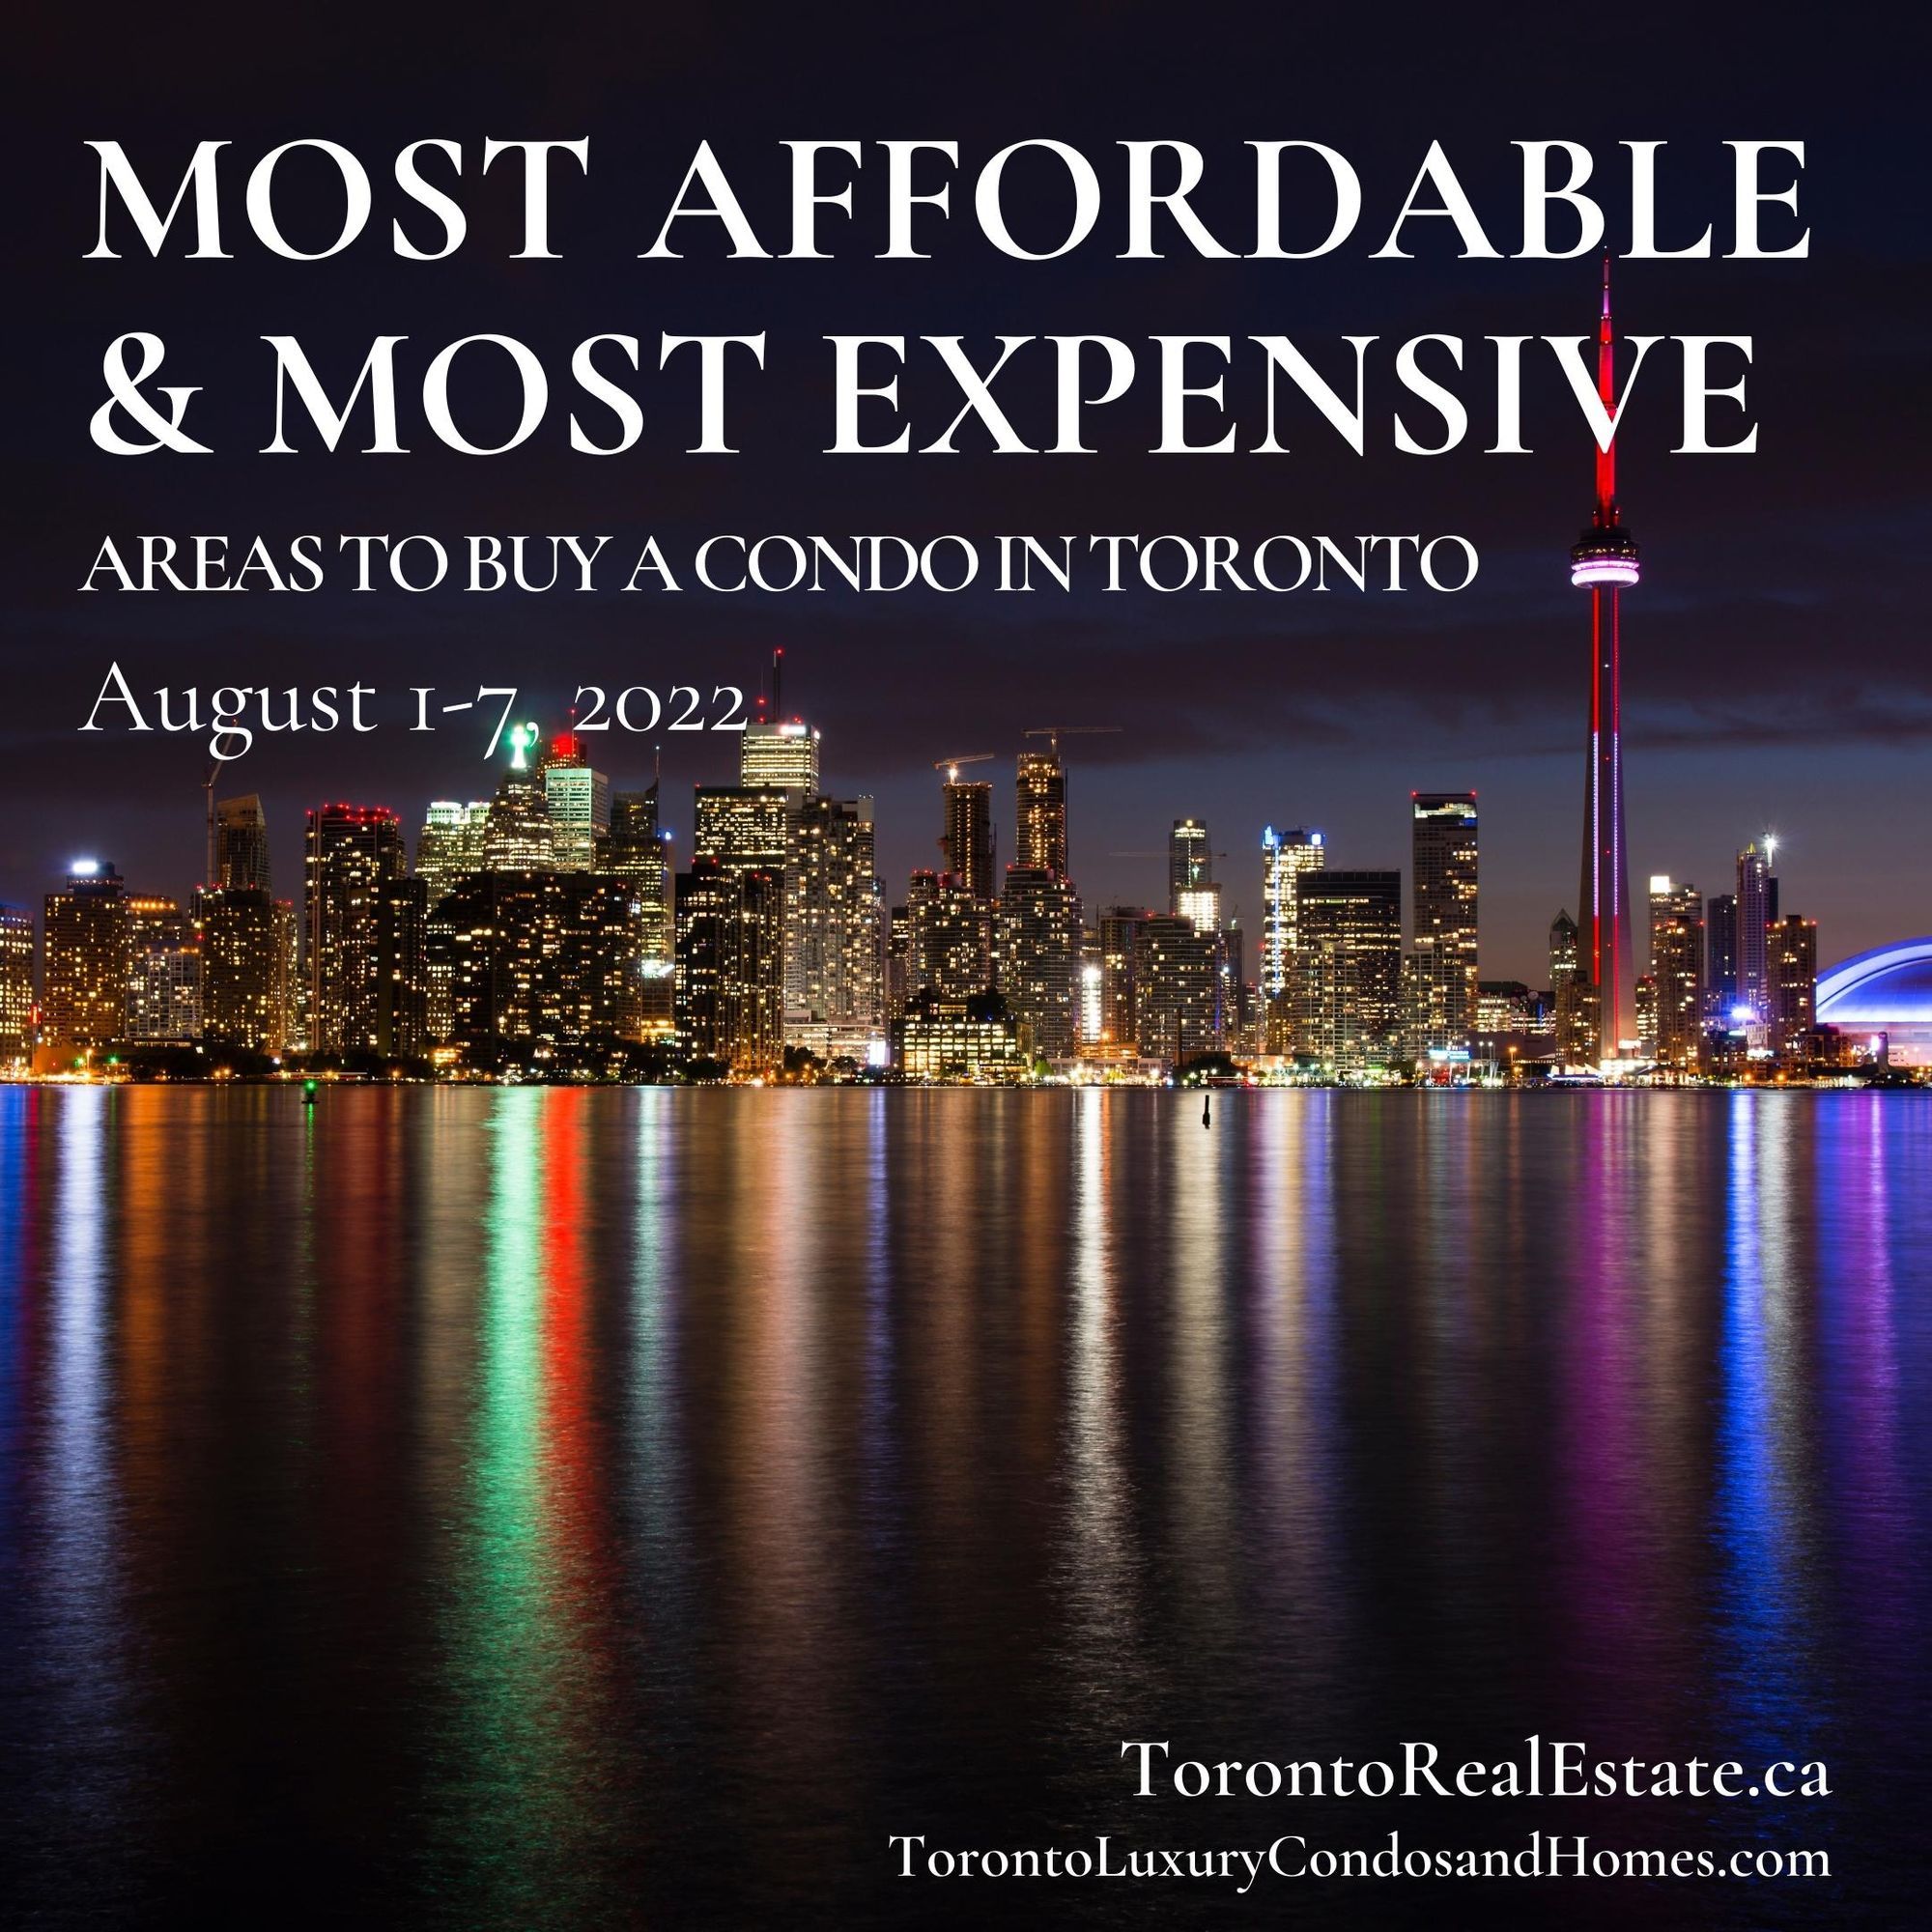 Most Affordable & Most Expensive Areas to Buy a Condo in Toronto | August 1-7, 2022